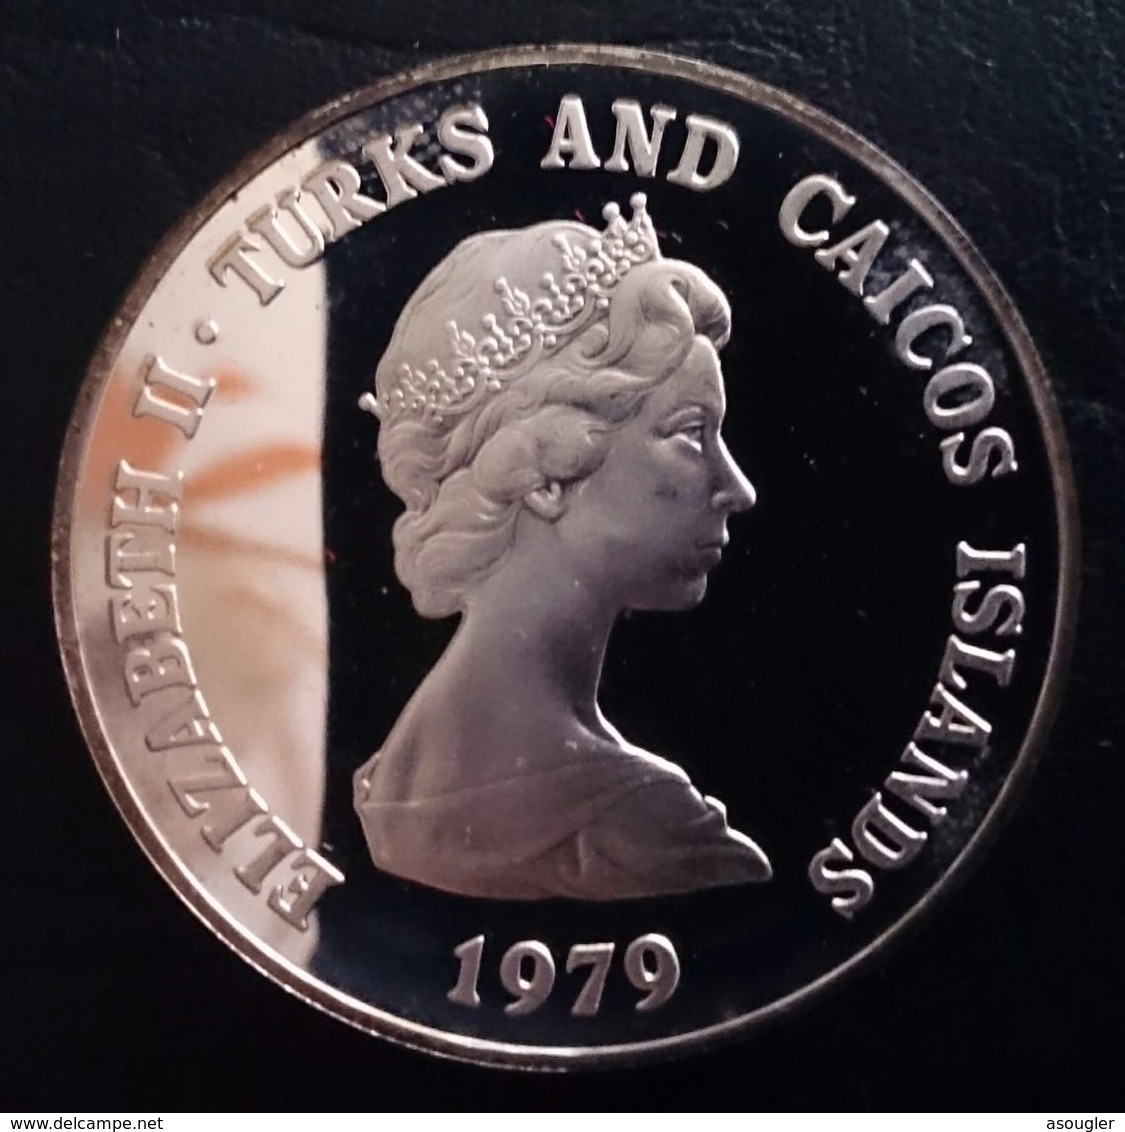 Turks And Caicos Islands 10 CROWNS 1979 SILVER PROOF "10th Anniversary - Prince Charles' I" Free Shipping Via Registered - Turcas Y Caicos (Islas)